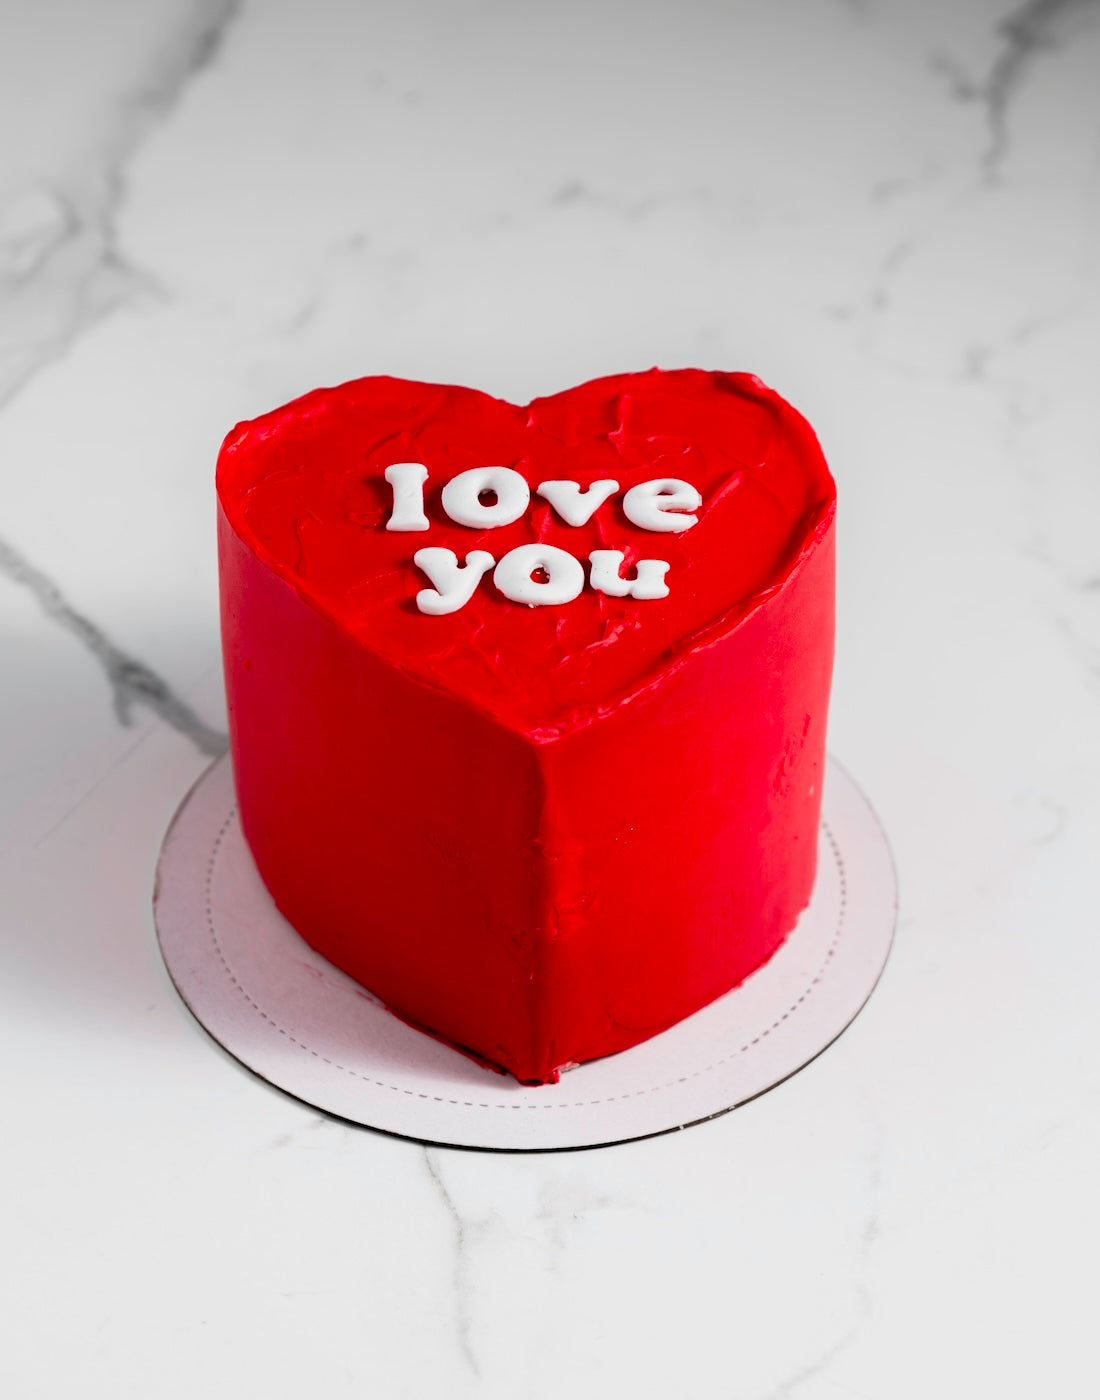 Cakes Candle Shape Heart On Gray Stock Photo 1345398686 | Shutterstock